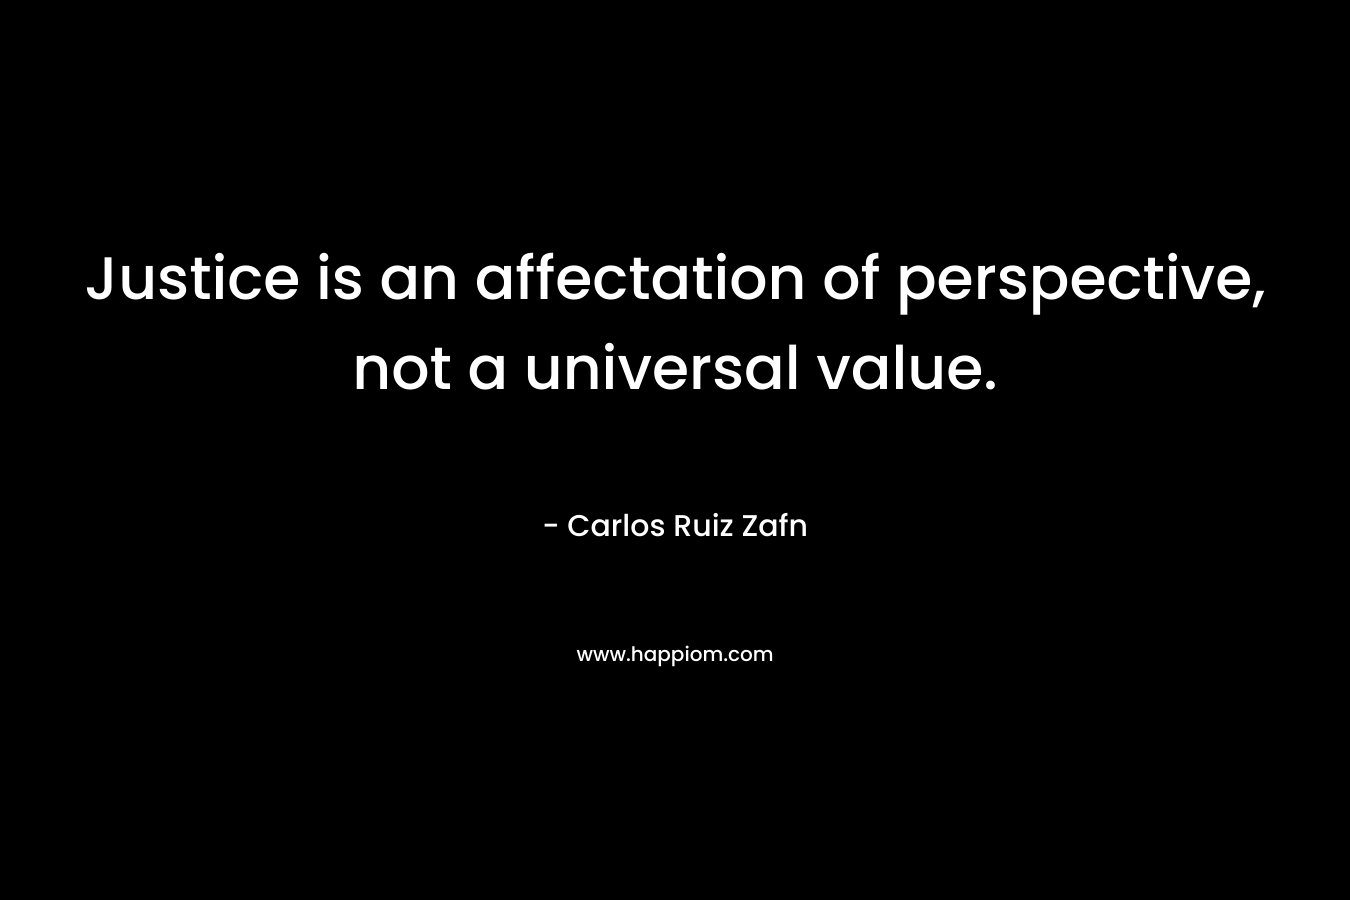 Justice is an affectation of perspective, not a universal value. – Carlos Ruiz Zafn